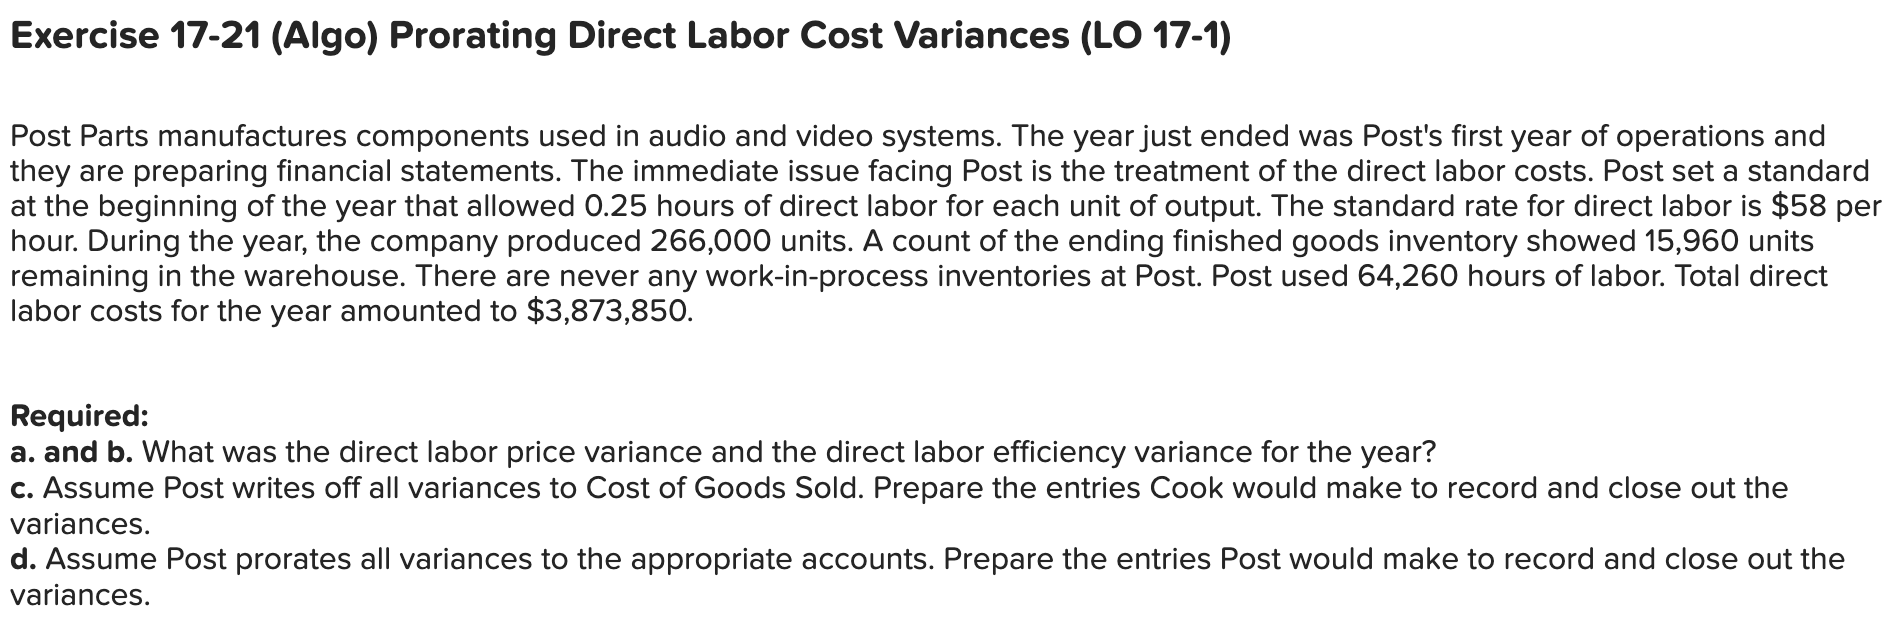 Exercise 17-21 (Algo) Prorating Direct Labor Cost Variances (LO 17-1) Post Parts manufactures components used